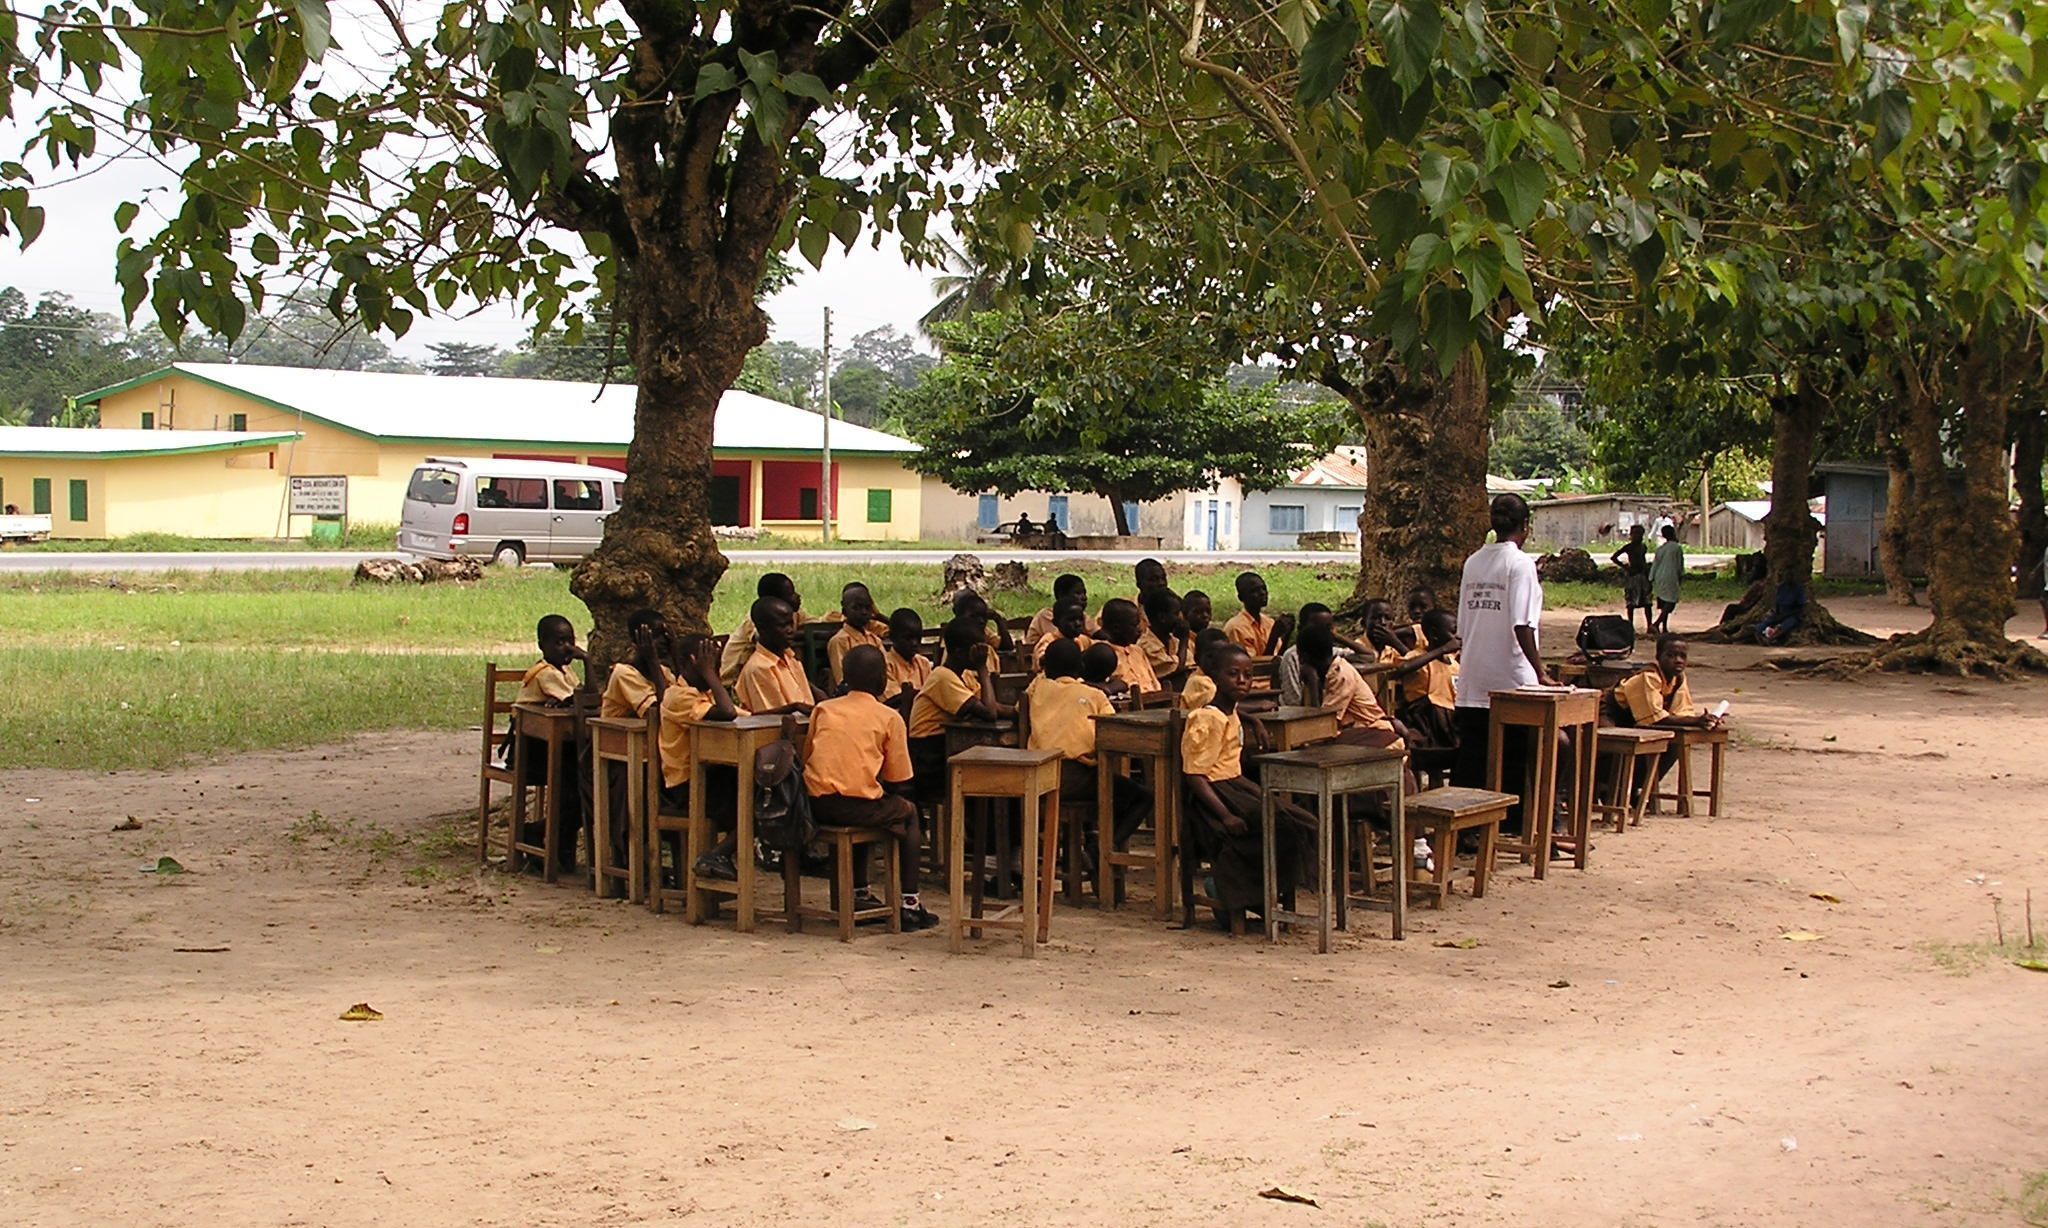 Help build classrooms for better education